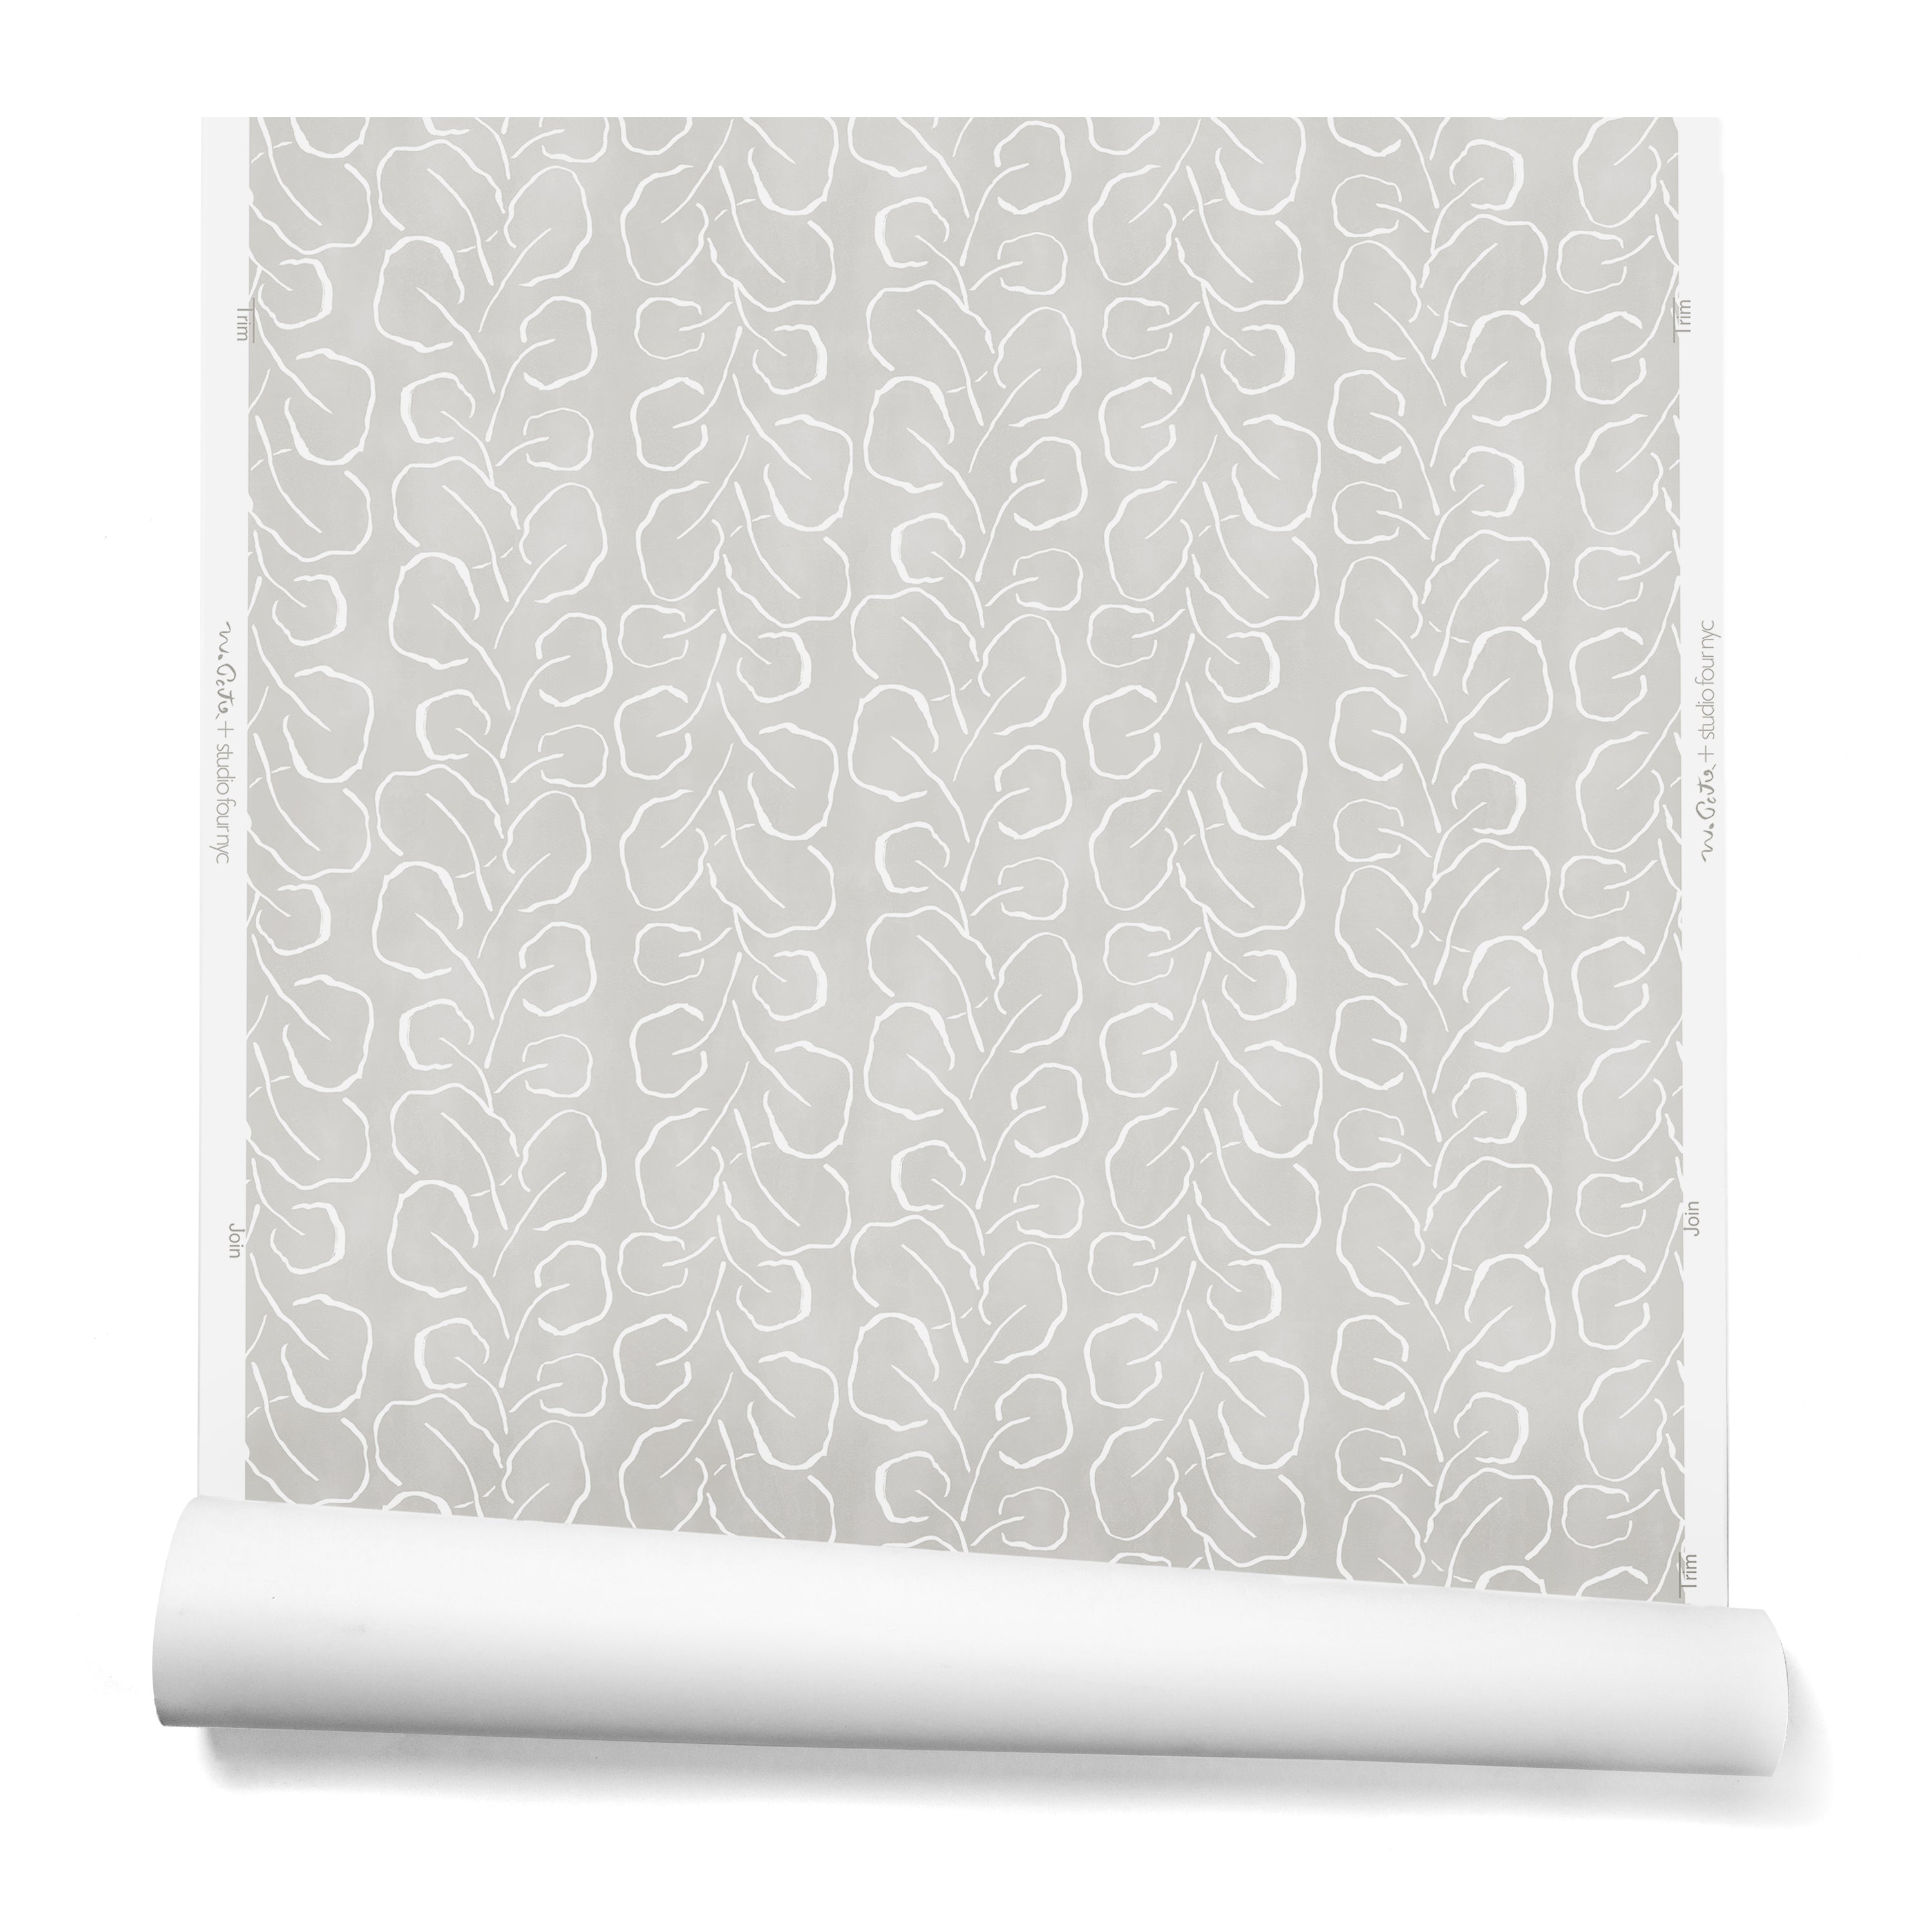 A hanging roll of wallpaper with a large-scale repeating leaf print in white on a light gray watercolor background.